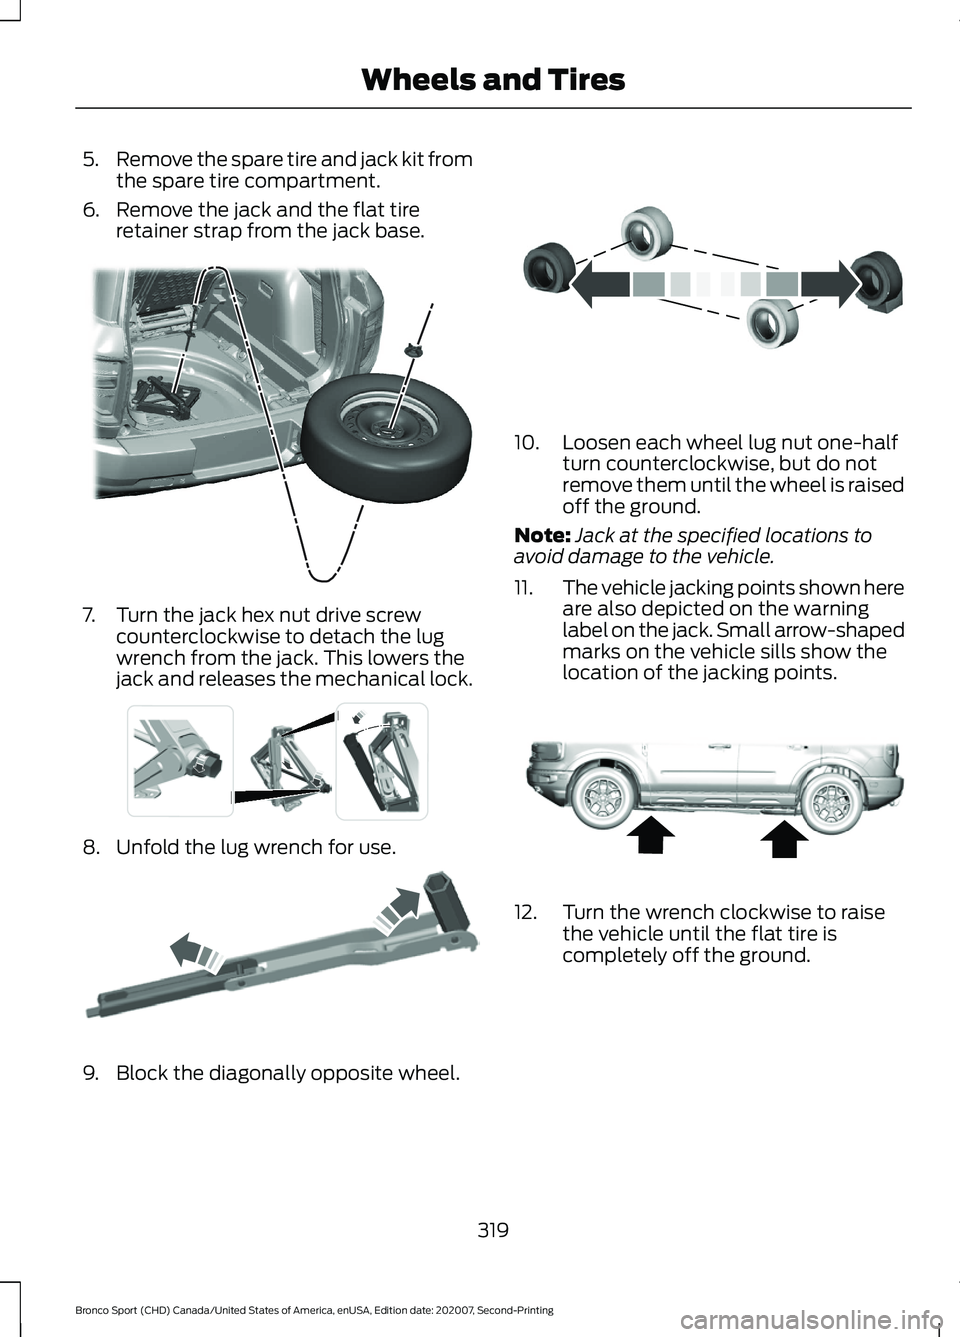 FORD BRONCO SPORT 2021  Owners Manual 5.
Remove the spare tire and jack kit from
the spare tire compartment.
6. Remove the jack and the flat tire retainer strap from the jack base. 7. Turn the jack hex nut drive screw
counterclockwise to 